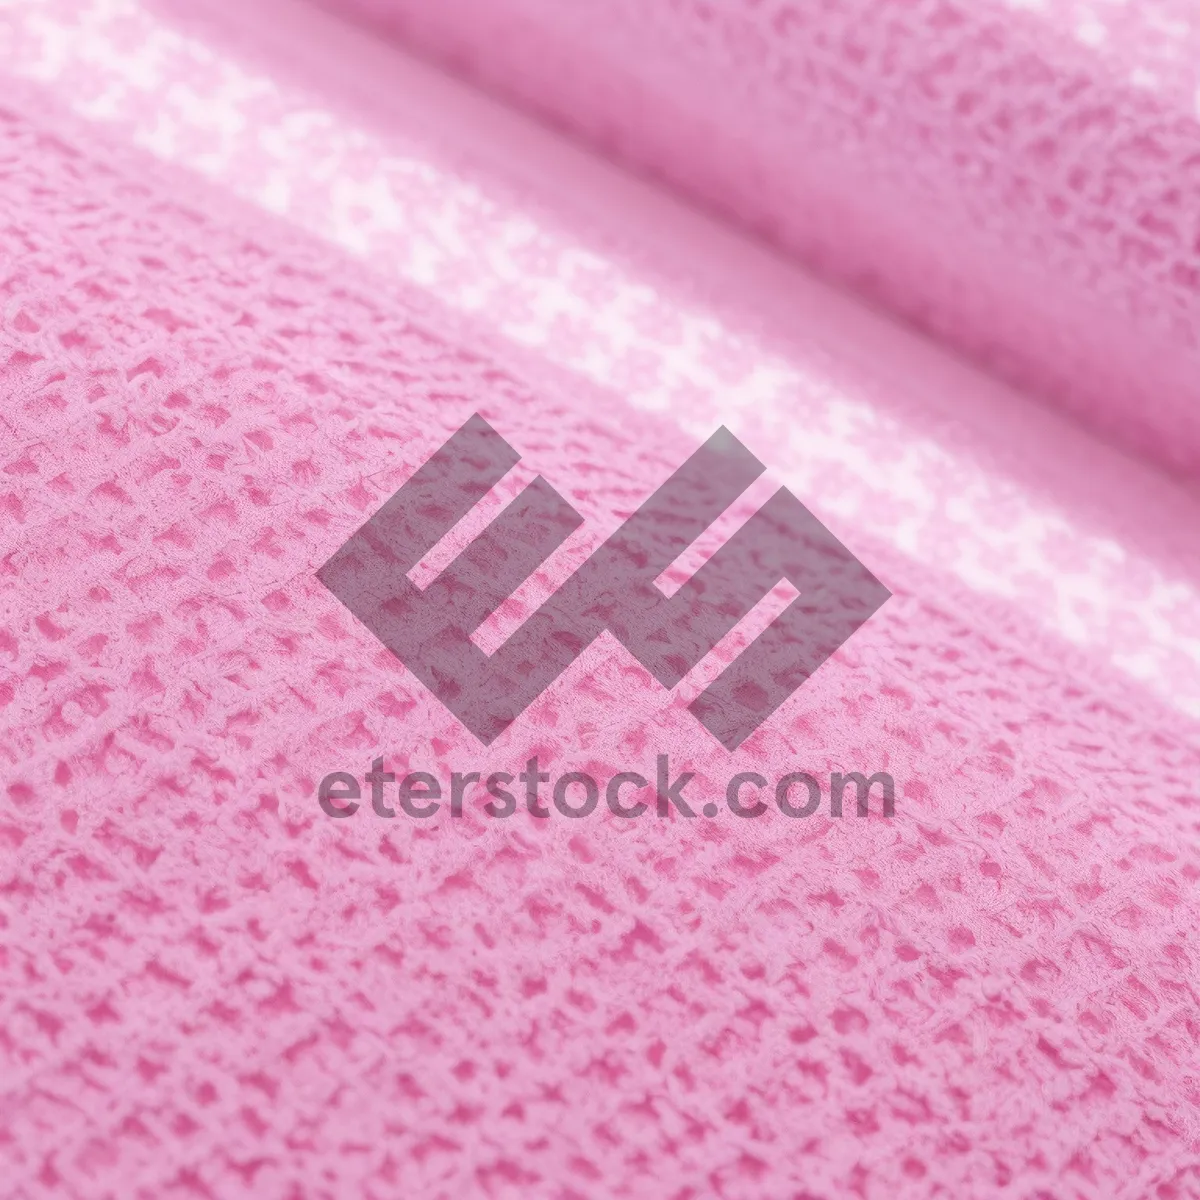 Picture of Pink Satin Textured Fabric Design